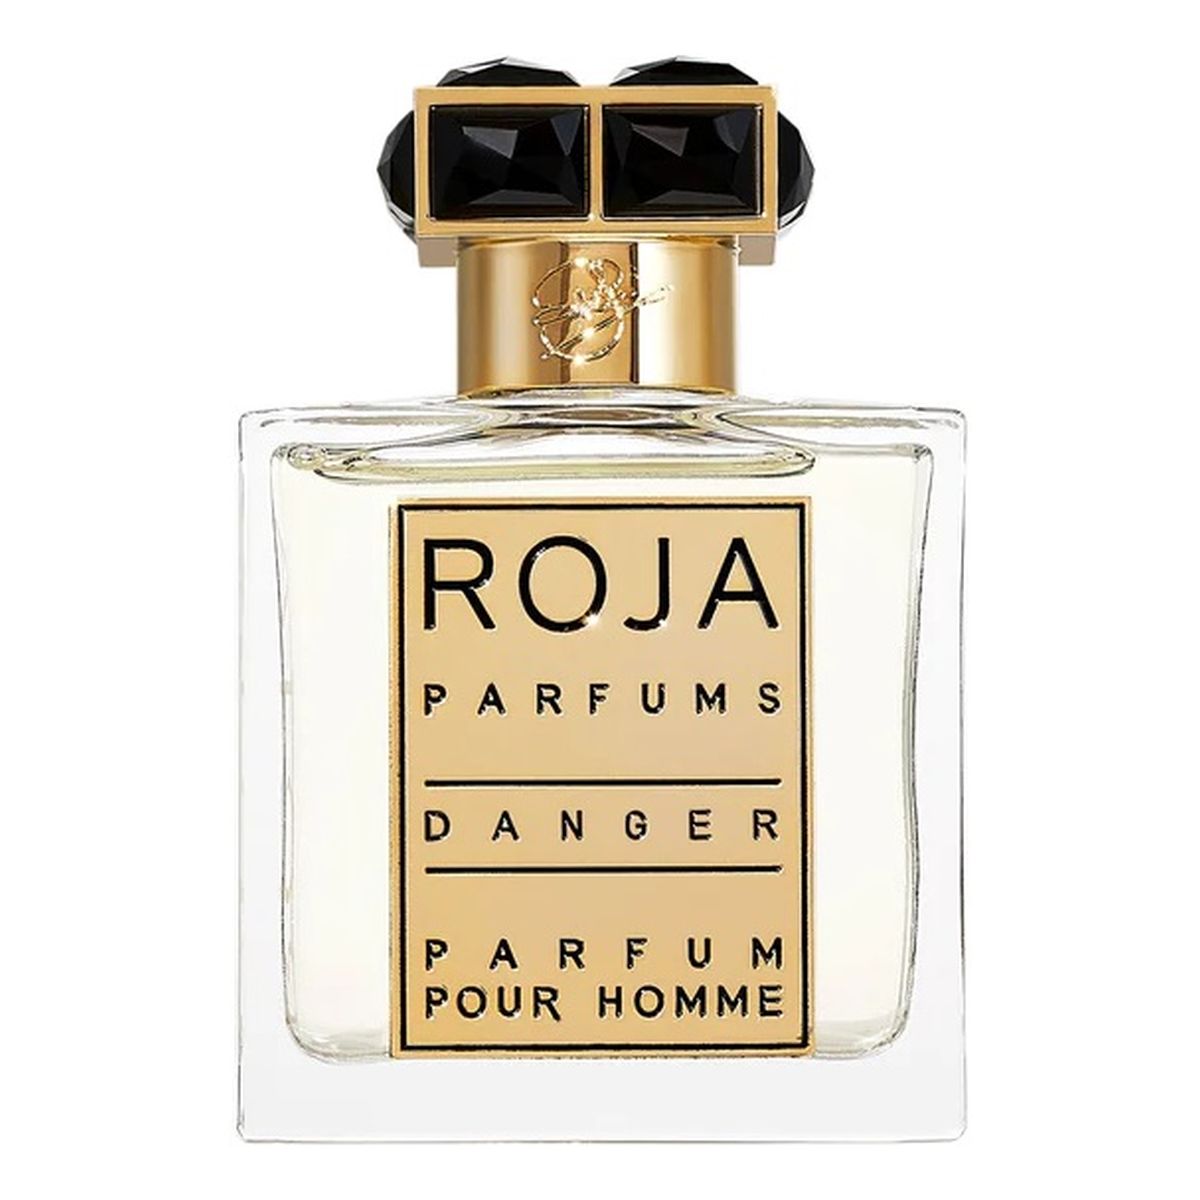 Roja Parfums Danger Pour Homme Perfumy spray 50ml